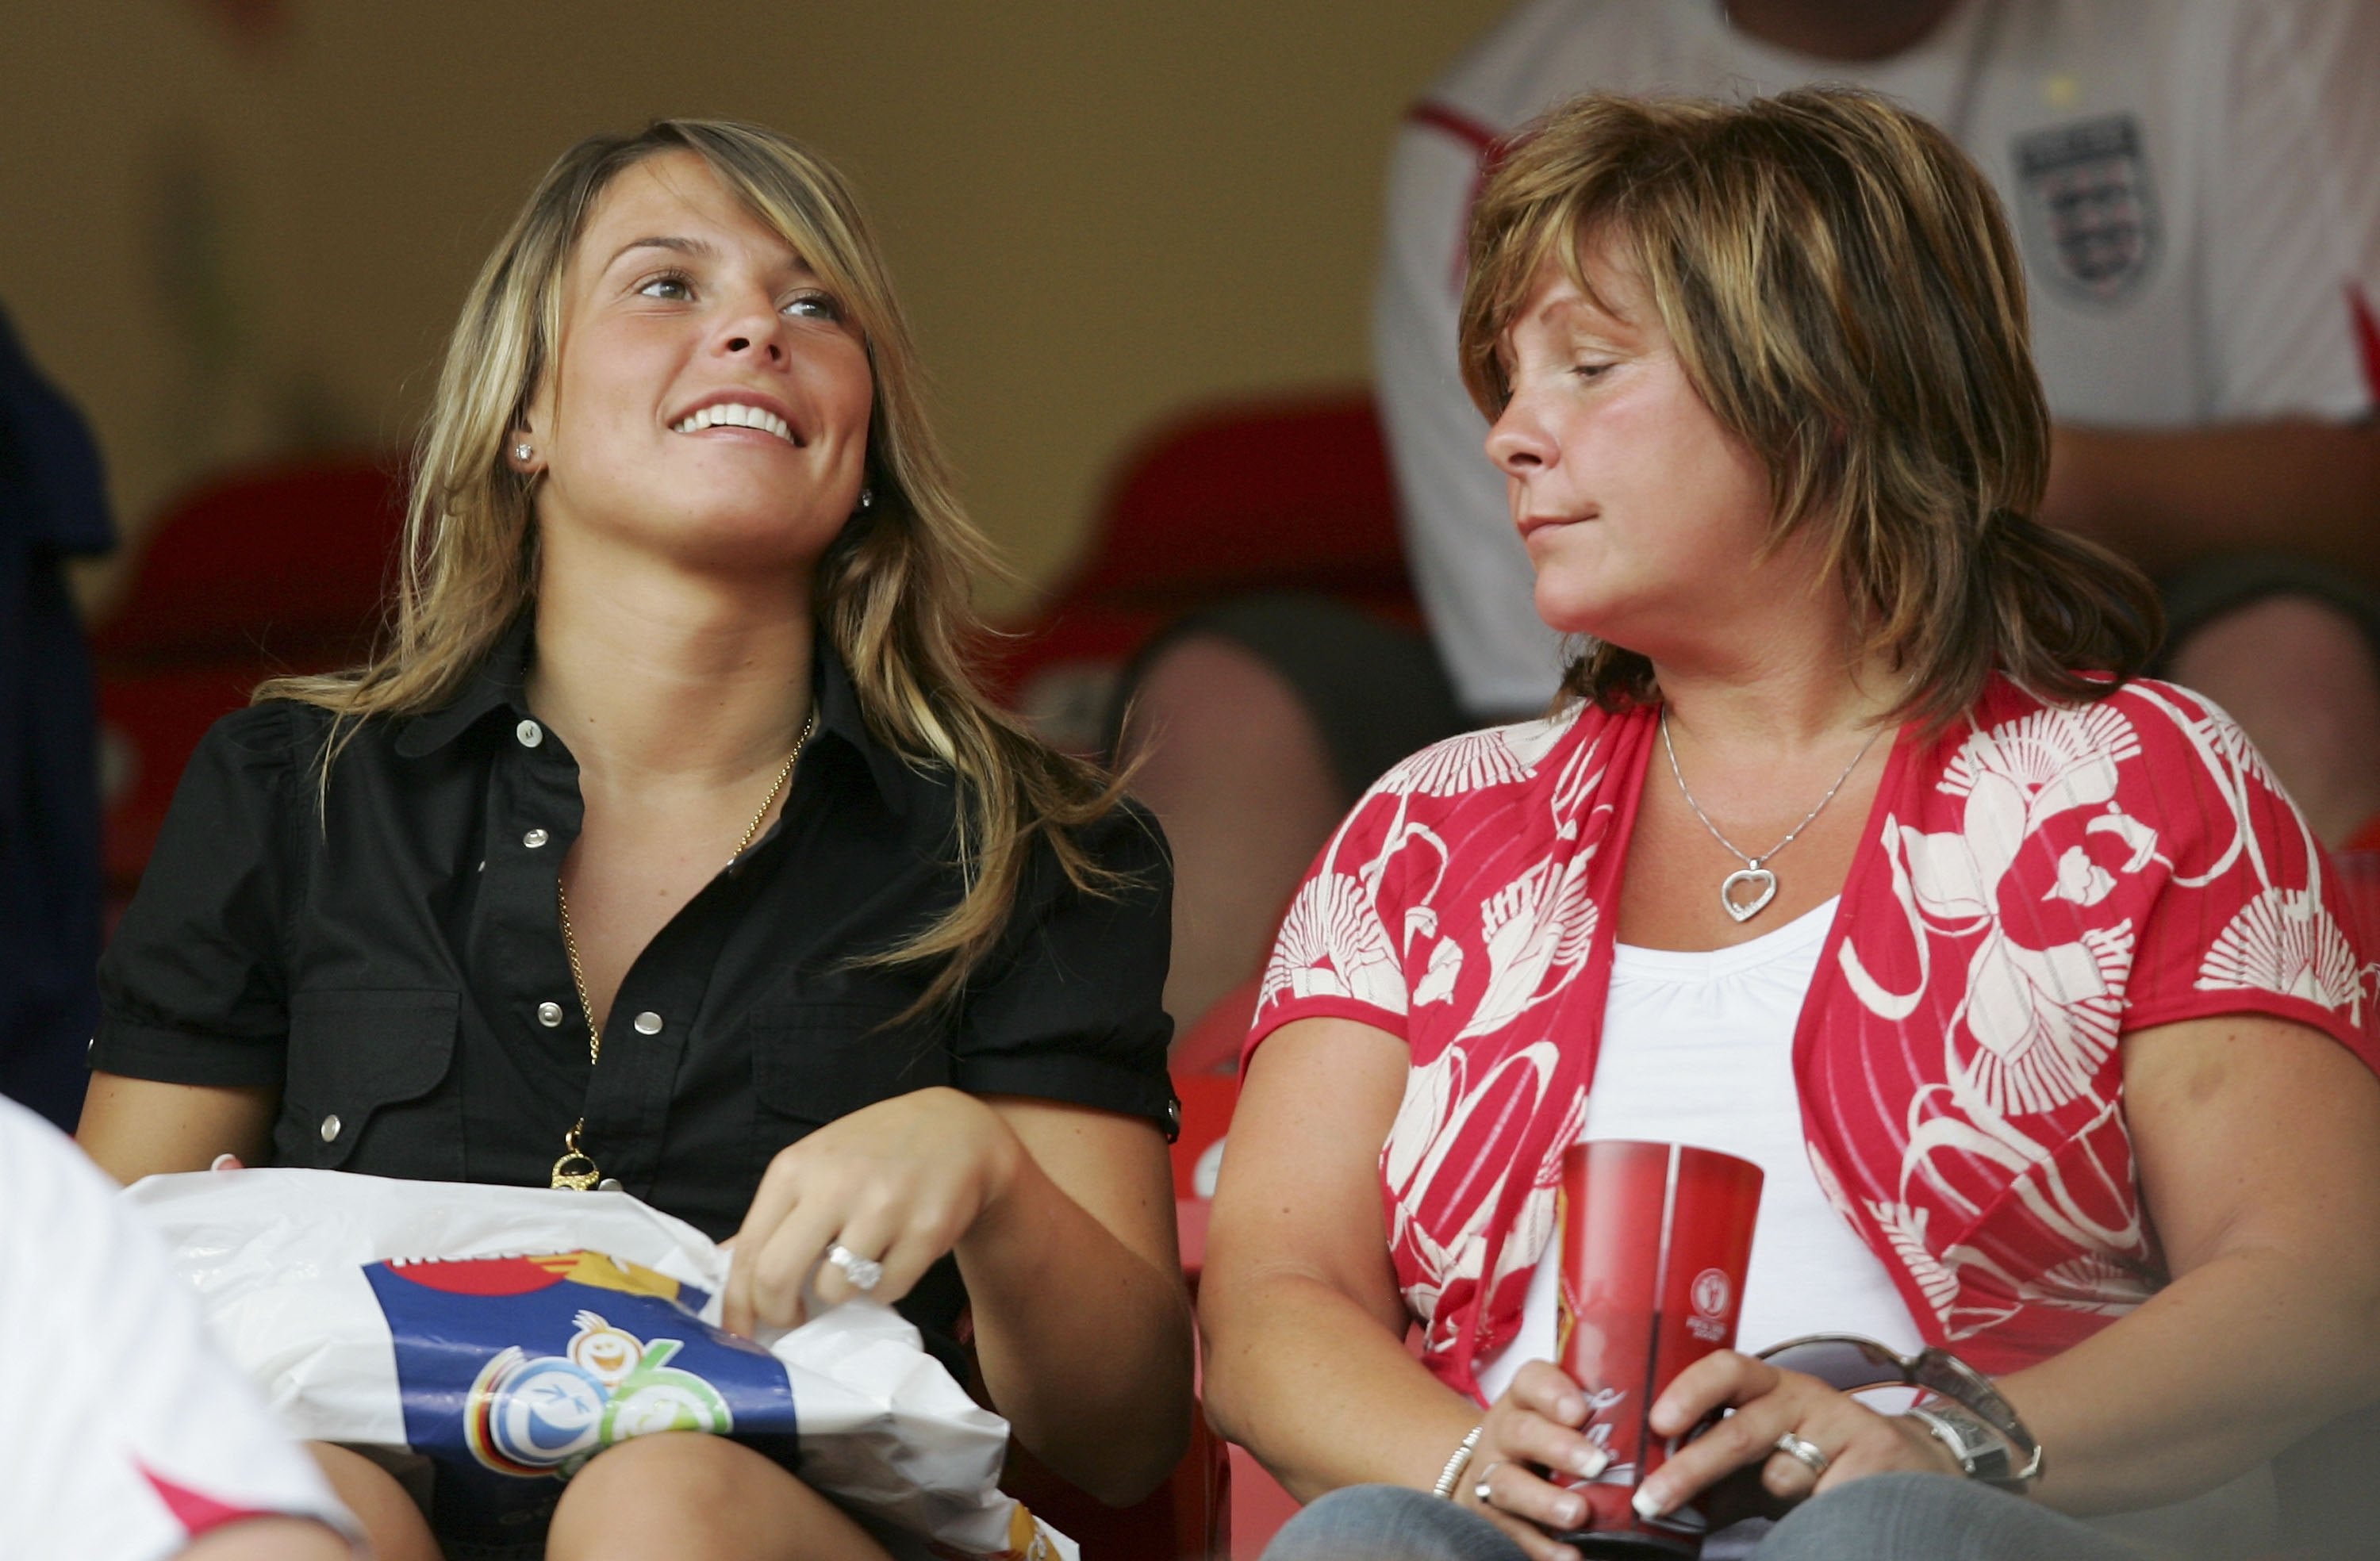 Coleen and her mum Colette at the World Cup in 2006